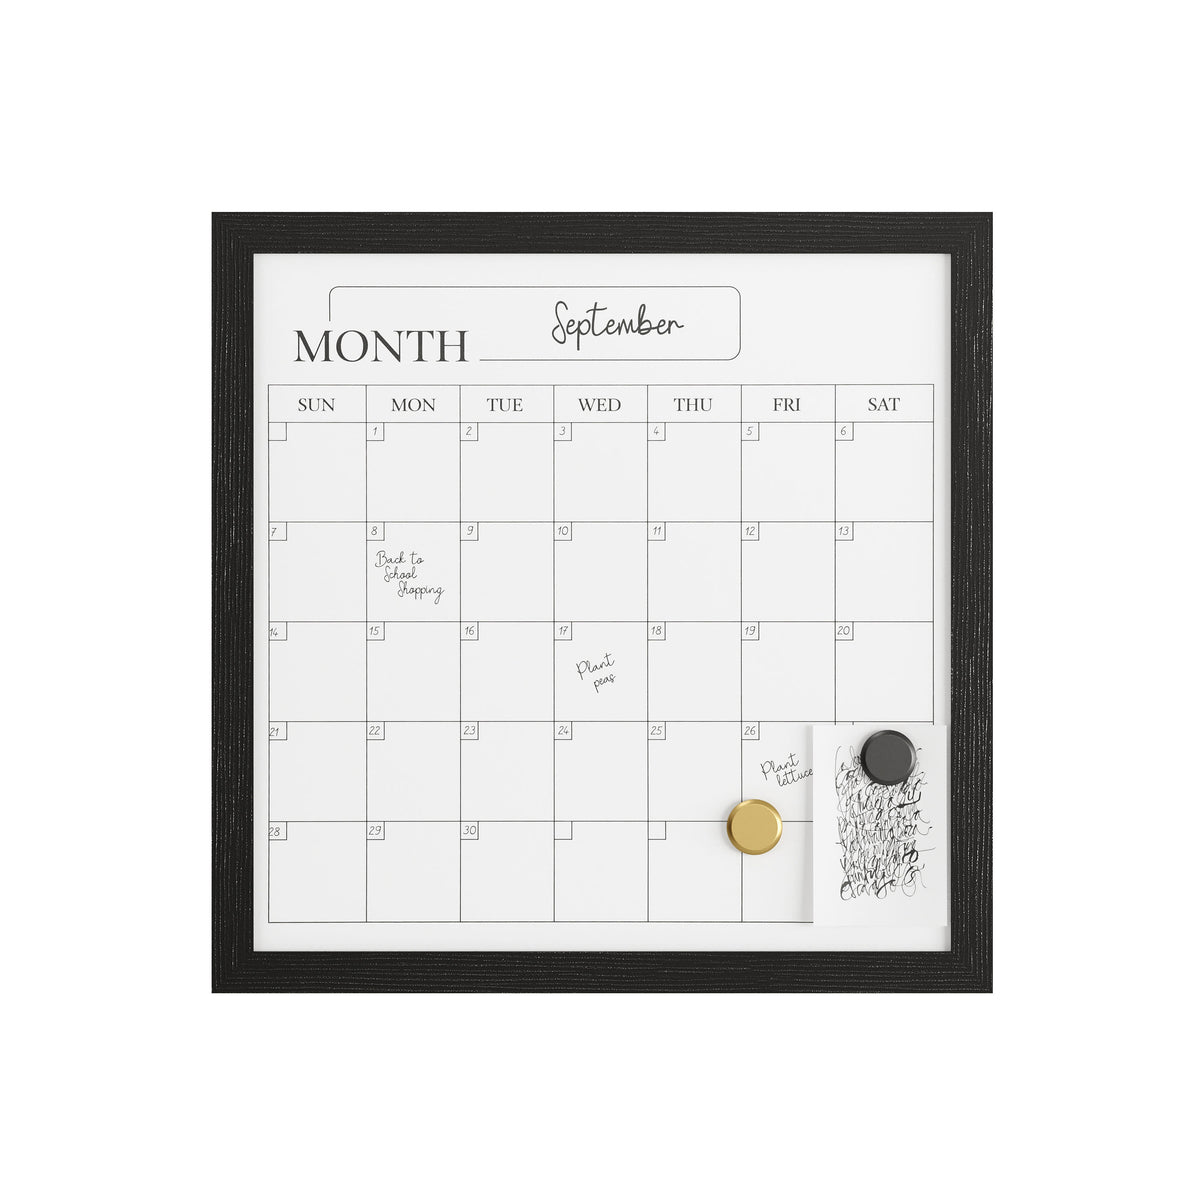 Black Woodgrain |#| Dry Erase Magnetic Monthly Calendar and with Black Woodgrain Frame - 18" x 18"